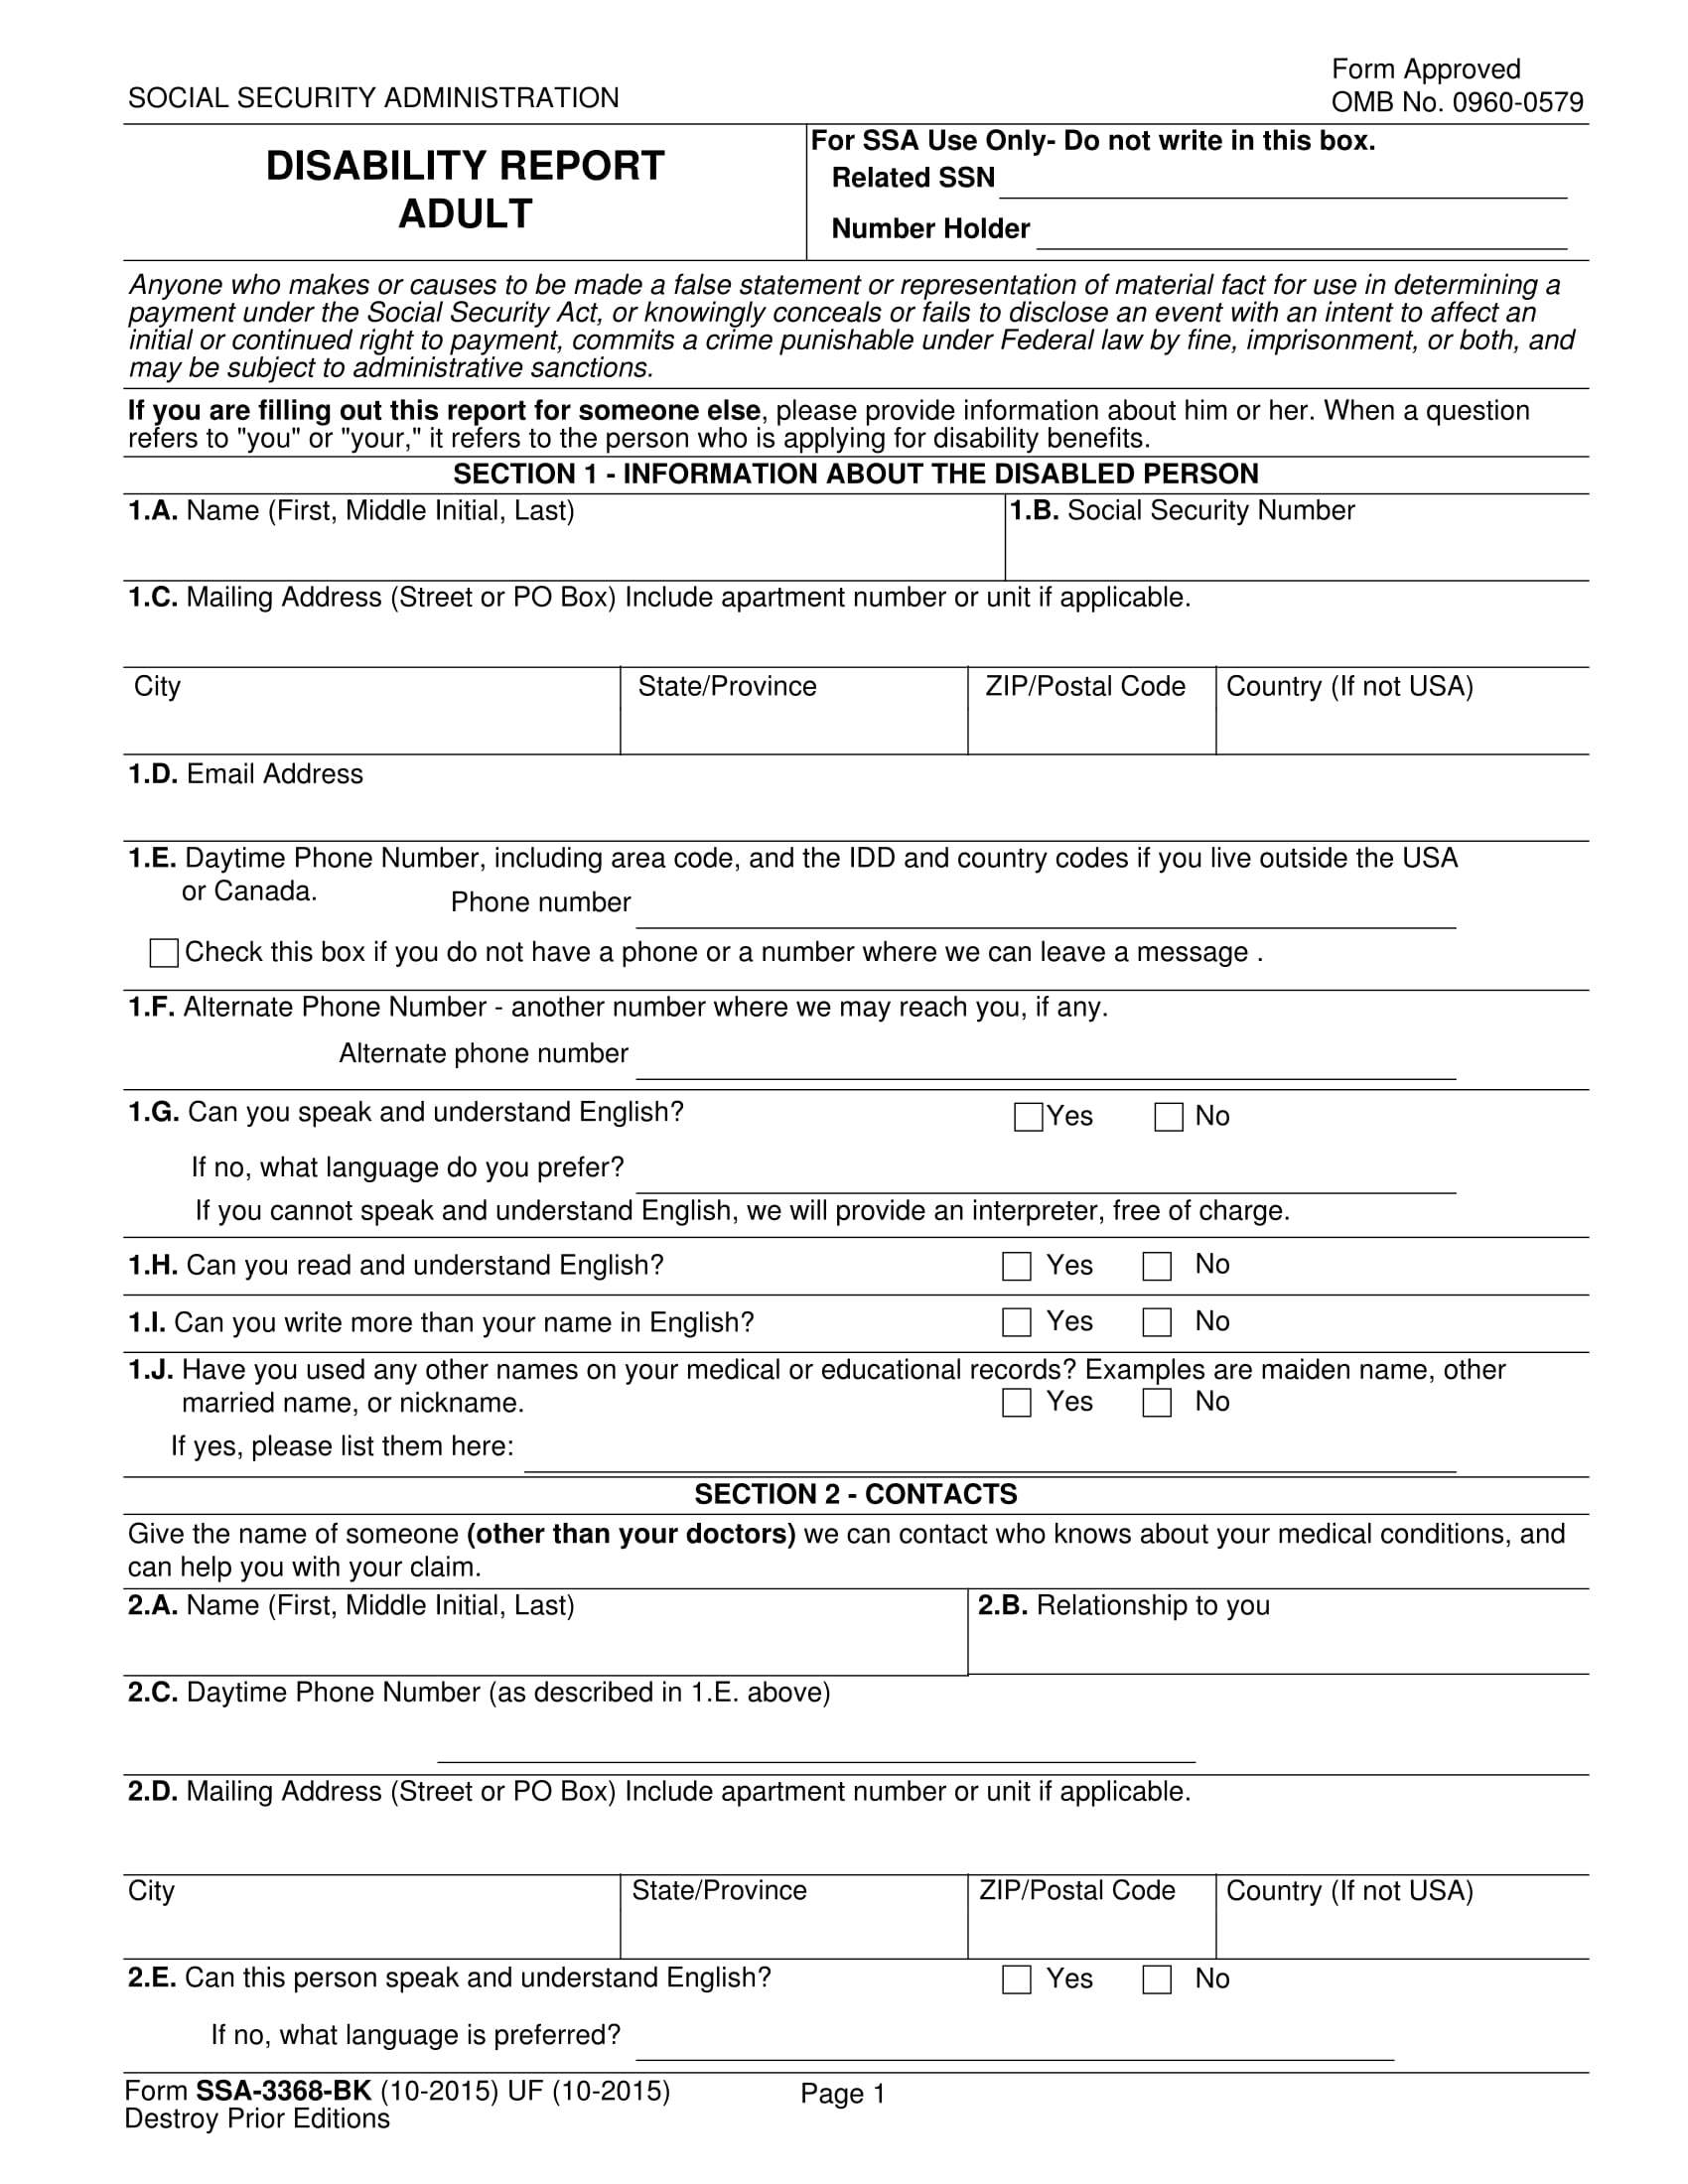 fillable adult disability report form 03